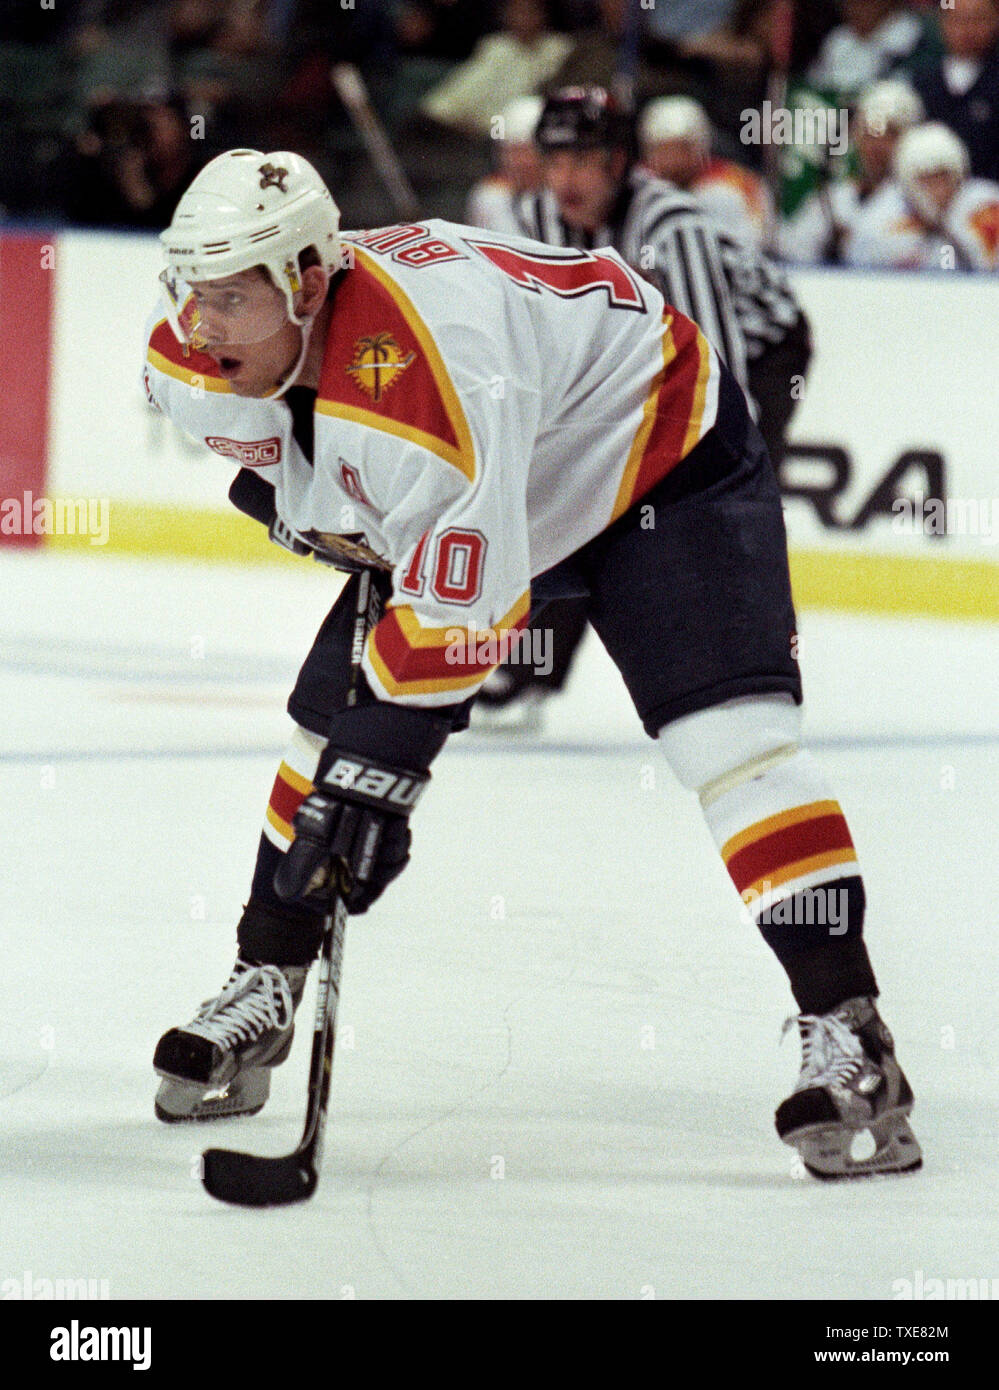 MIA2000011201 - 12 JANUARY 2000 - MIAMI, FLORIDA, USA: Florida Panthers Pavel  Bure scores the game winning goal past New York Islander goalie Kevin Weeks  in second period NHL action. The Panthers